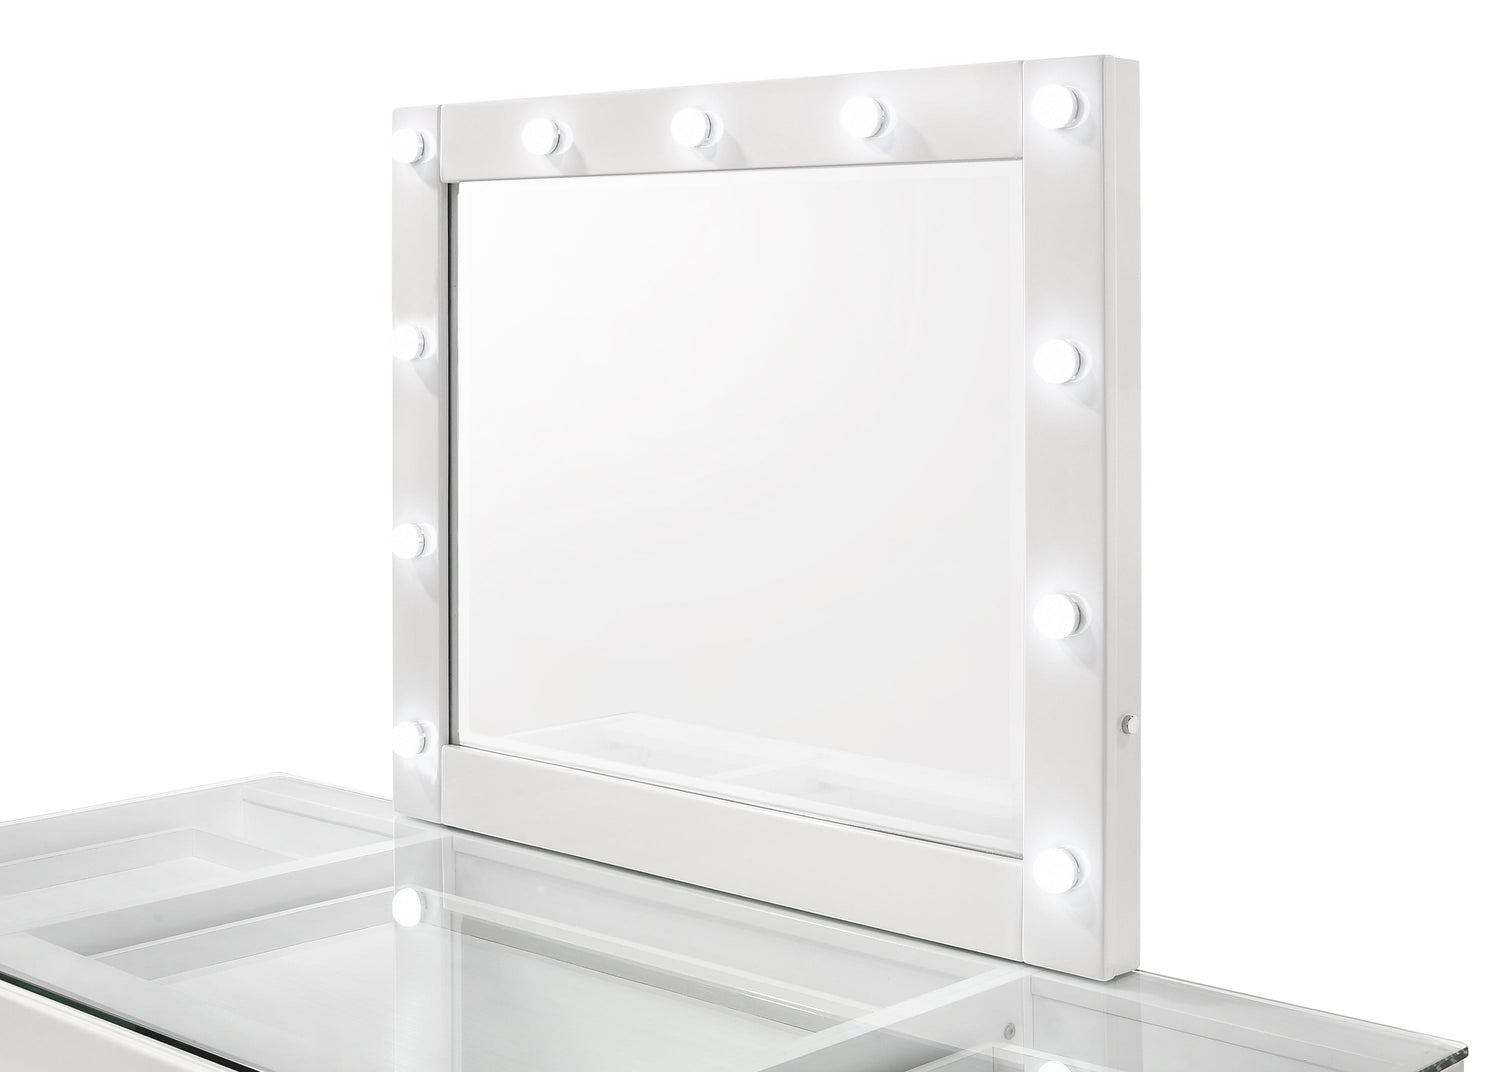 Avery White Makeup Vanity Set with Lighted Mirror - SET | B4850WH-91-TOP | B4850WH-91-BASE | B4850WH-91-11 | B4851WH-93 - Bien Home Furniture &amp; Electronics